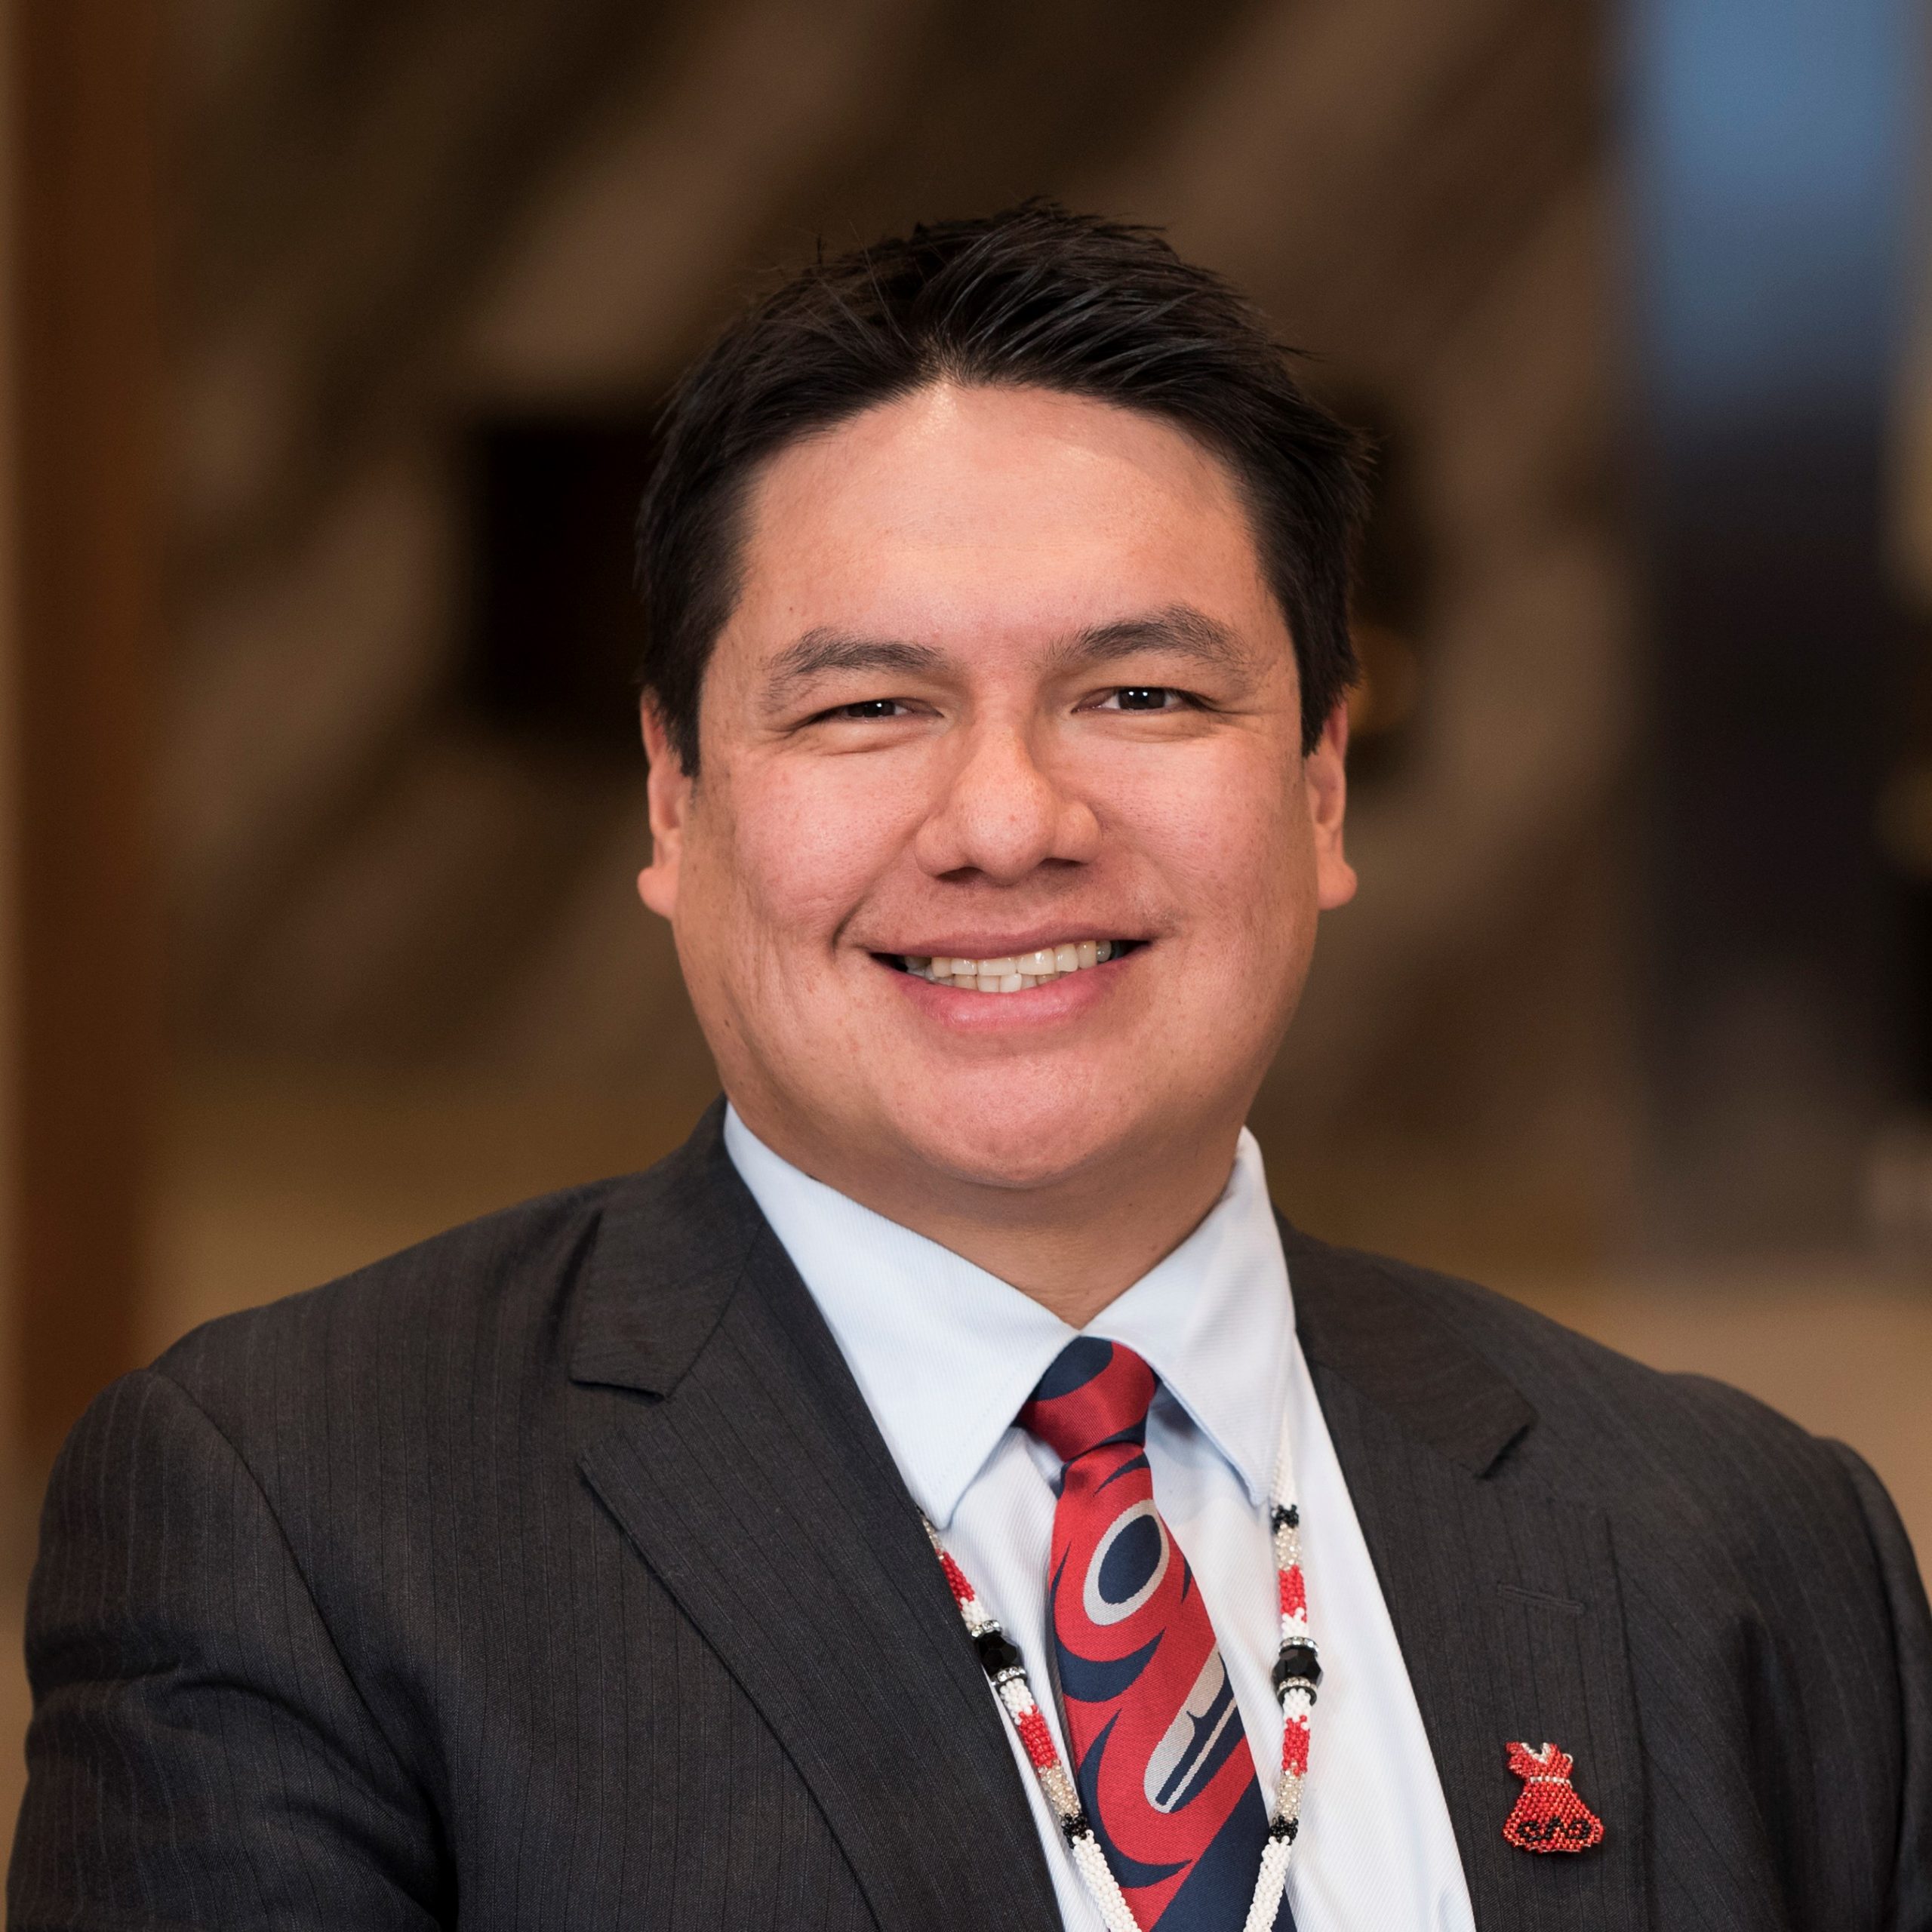 alt= A headshot of a man, Grand Chief Derek Fox, in a white collared shirt, black jacket, and red tie